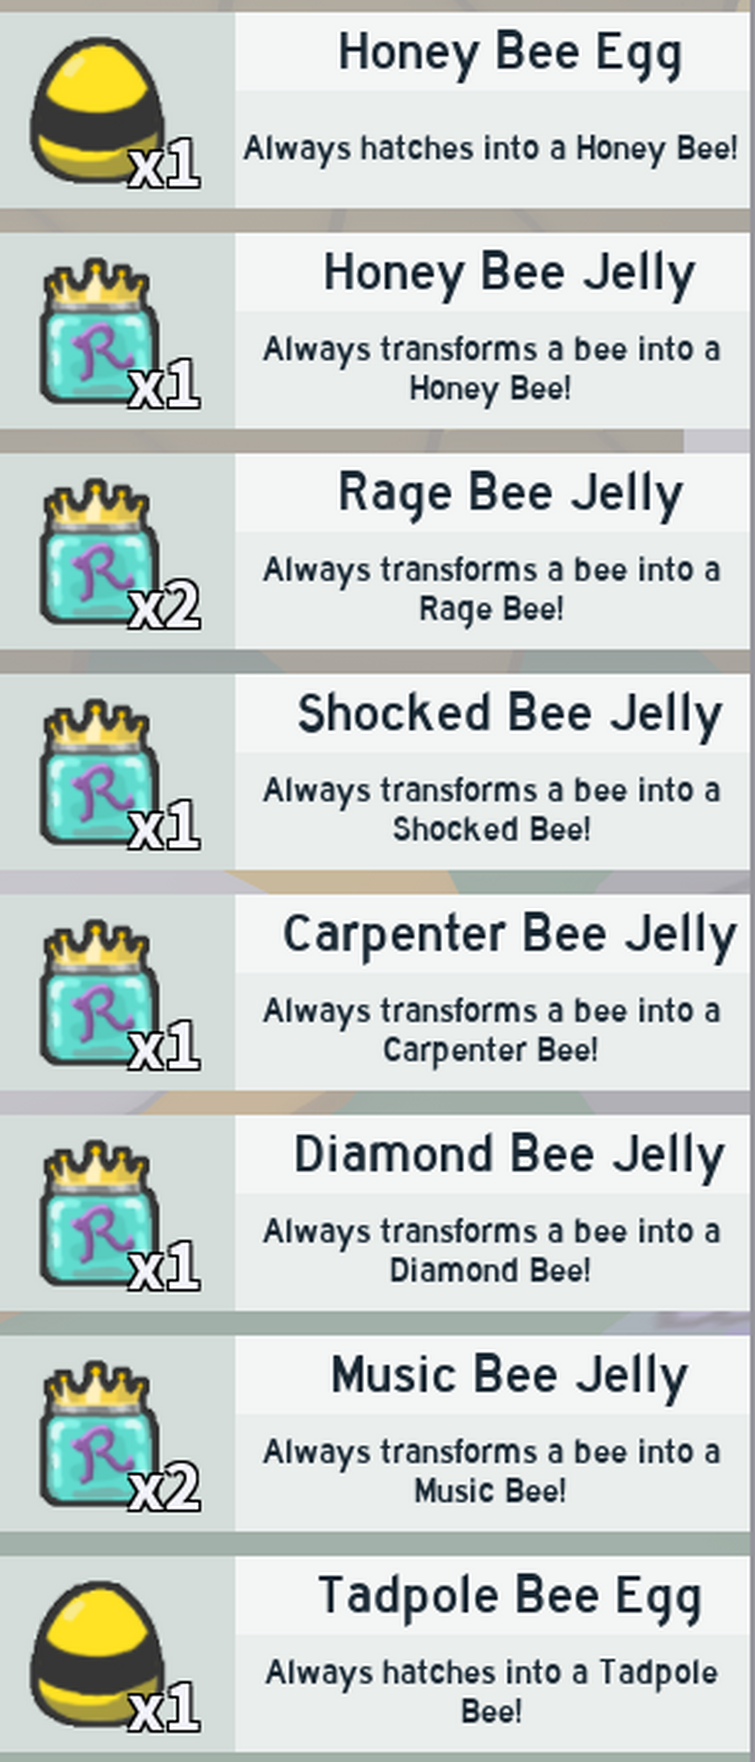 Is it worth it to spend silver eggs for hive spots or just buying basic eggs  is better : r/BeeSwarmSimulator